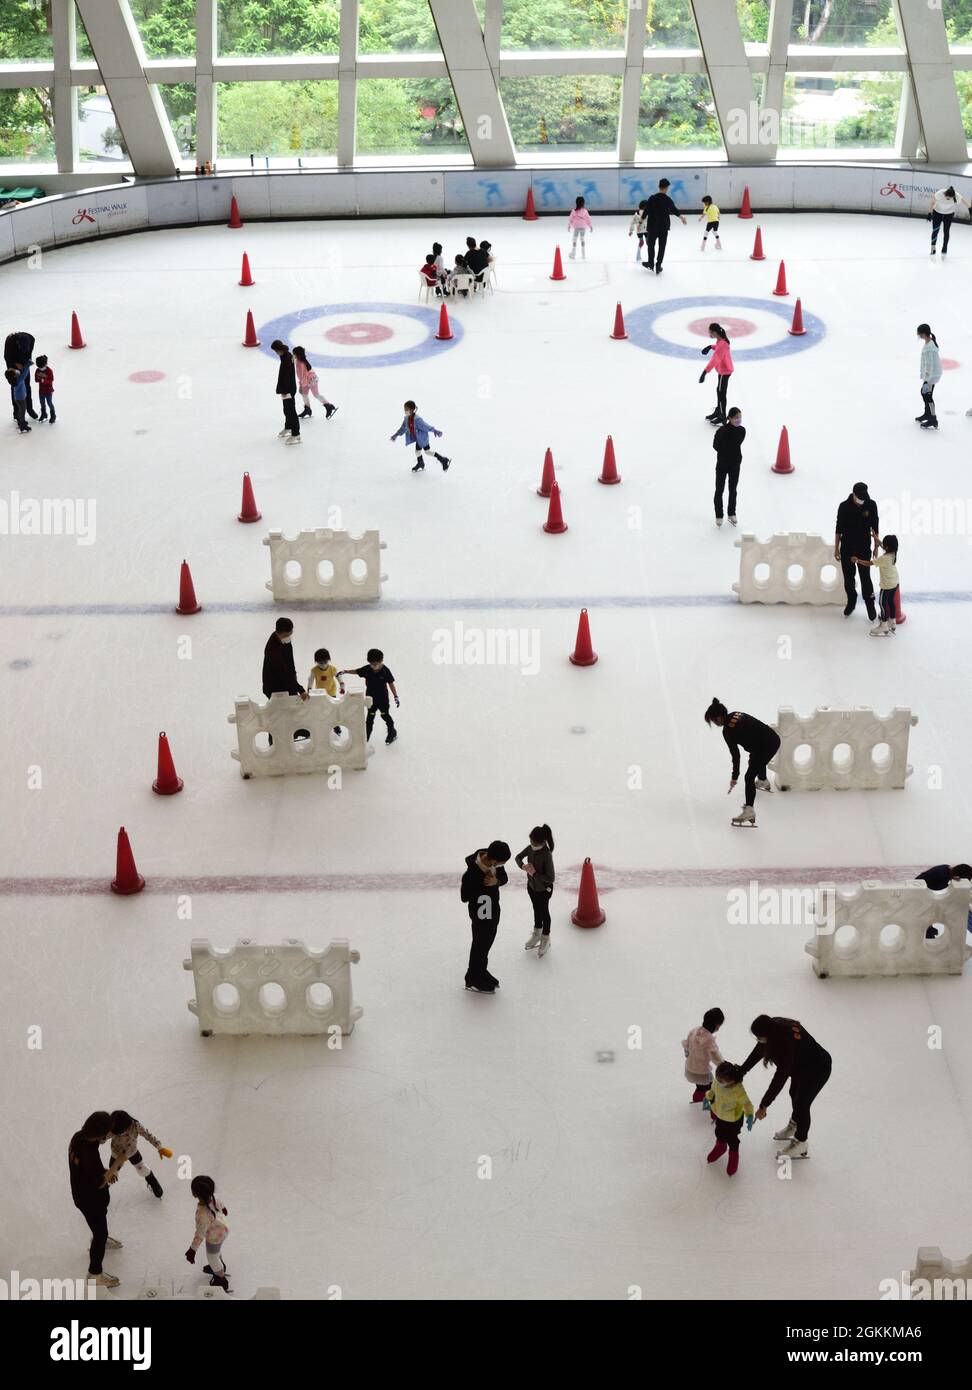 Ice rink in shopping mall, Hong Kong Stock Photo